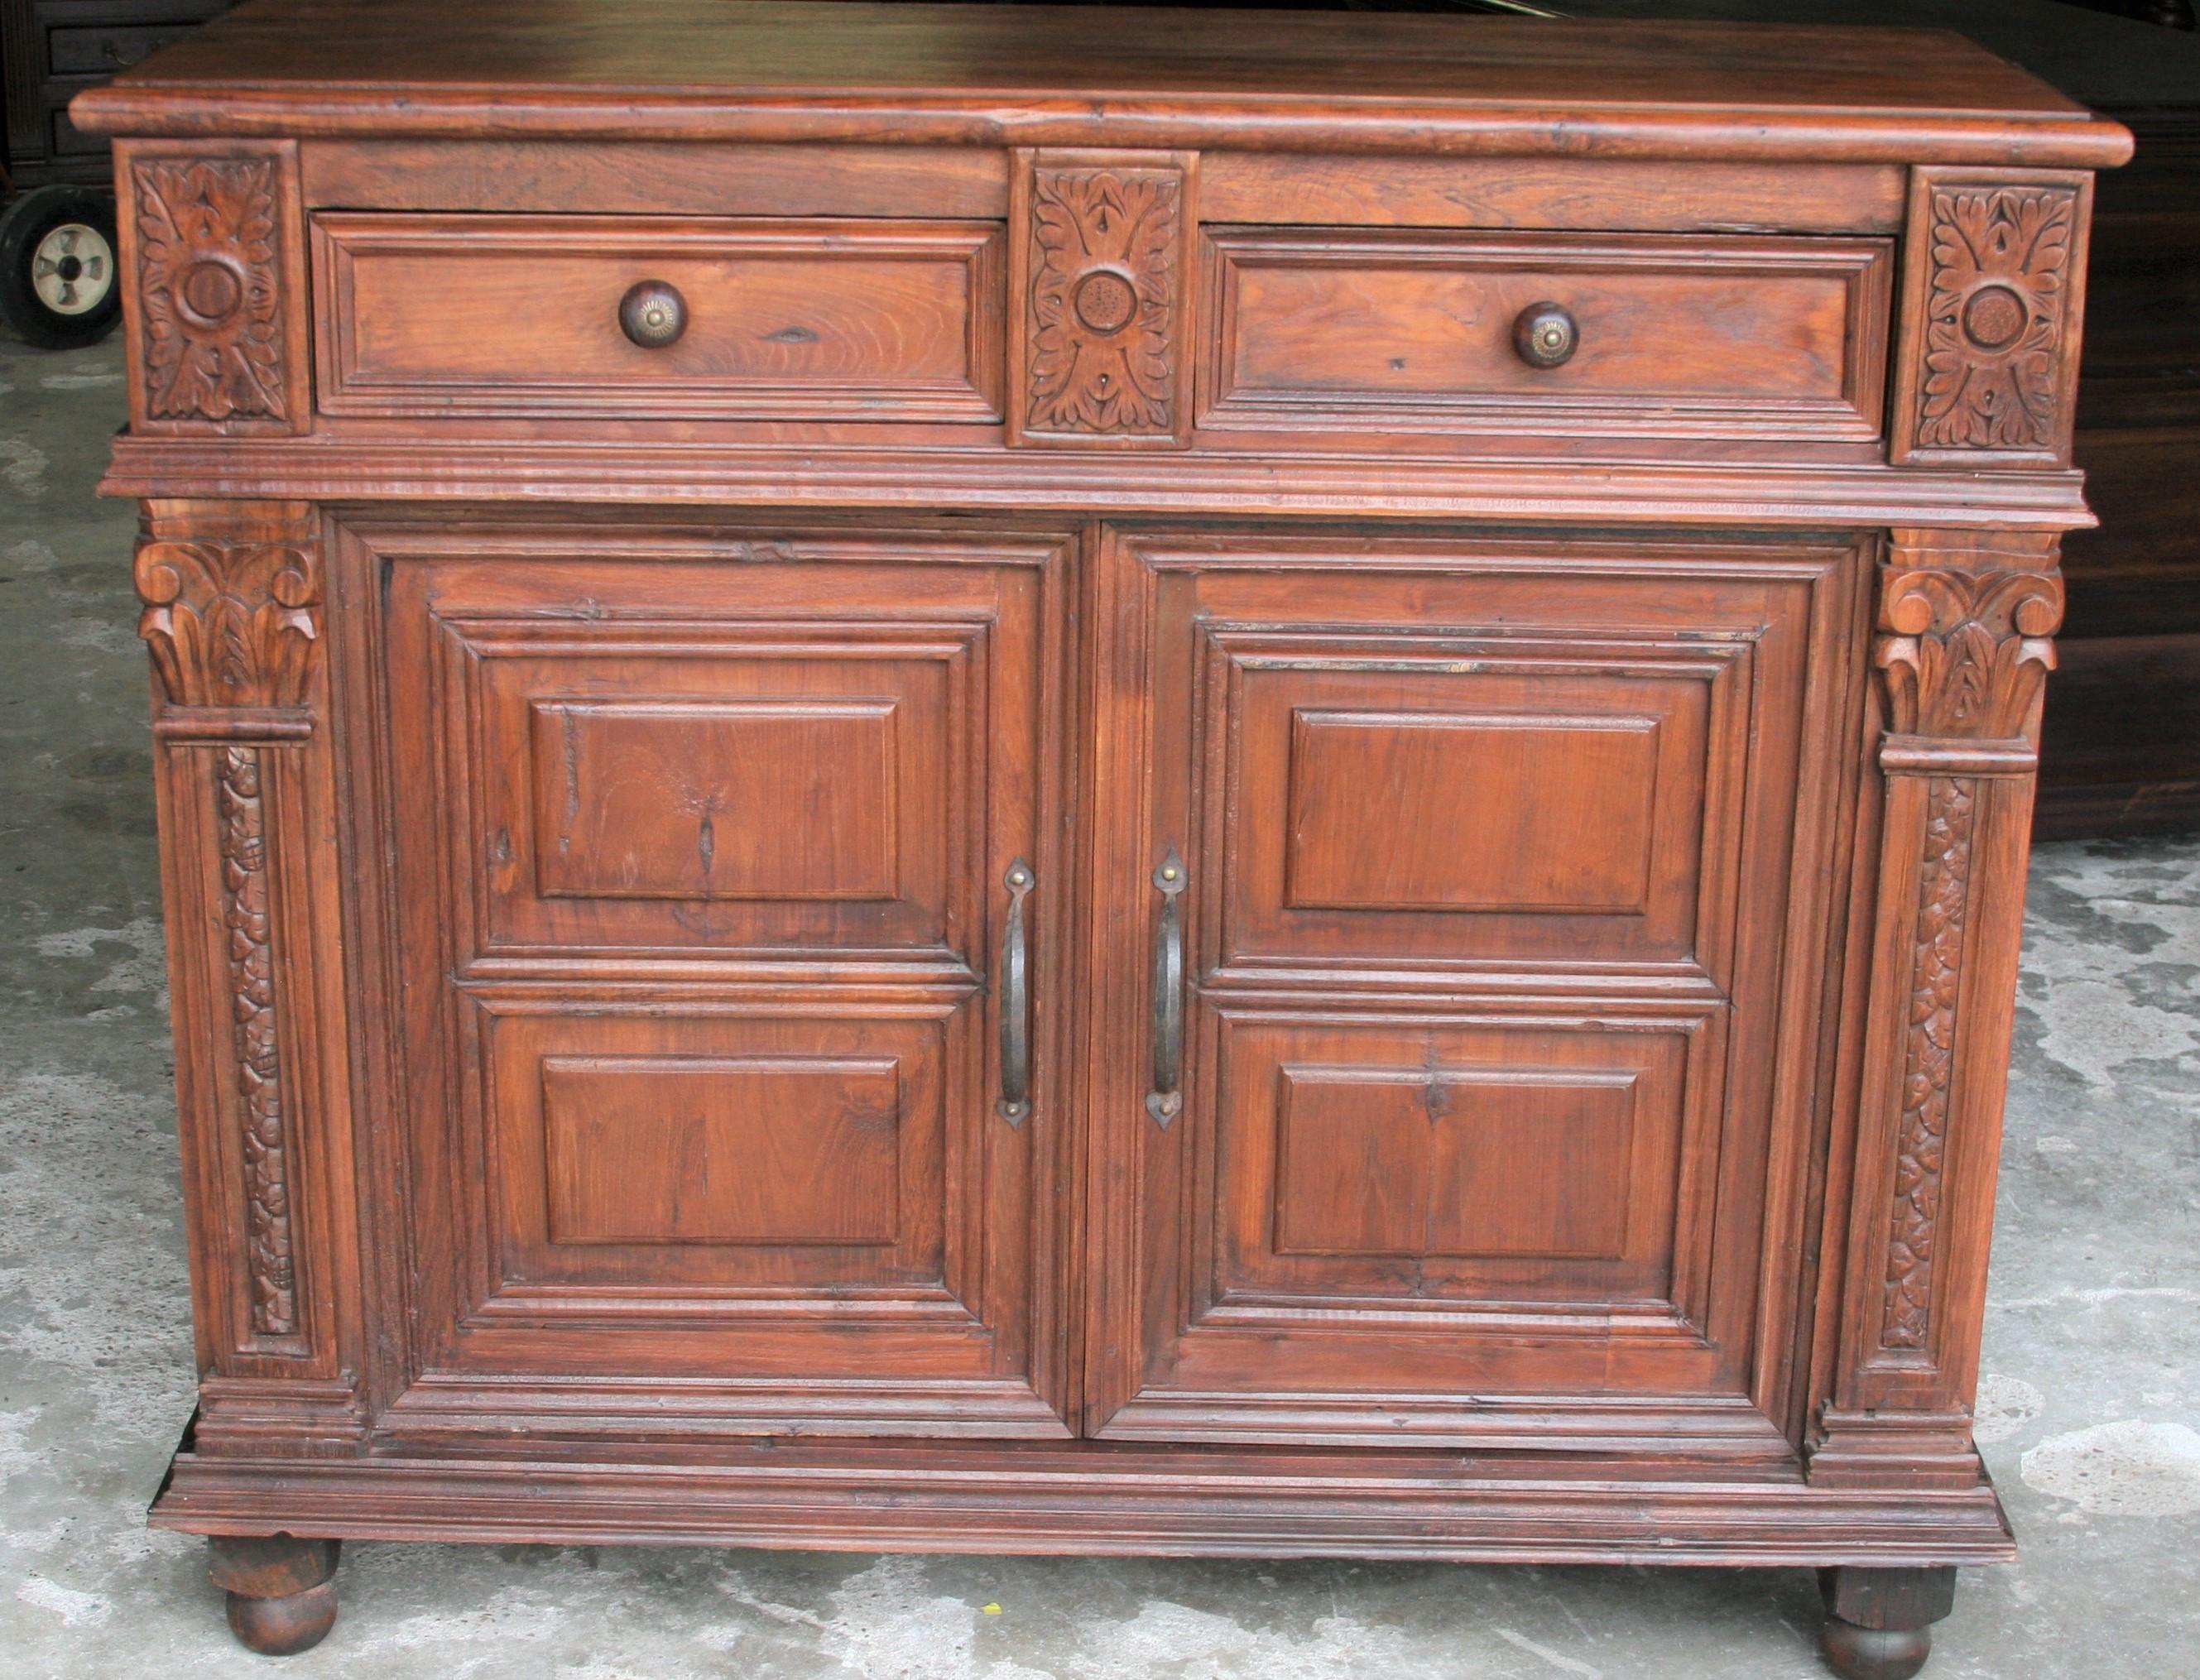 Superbly handcrafted this two doors and two drawers vanity once adorned the home of an European settler.
The carvings on this piece is exceptional. The pictures show every aspect of the vanity. It is durable and will last several generations. The